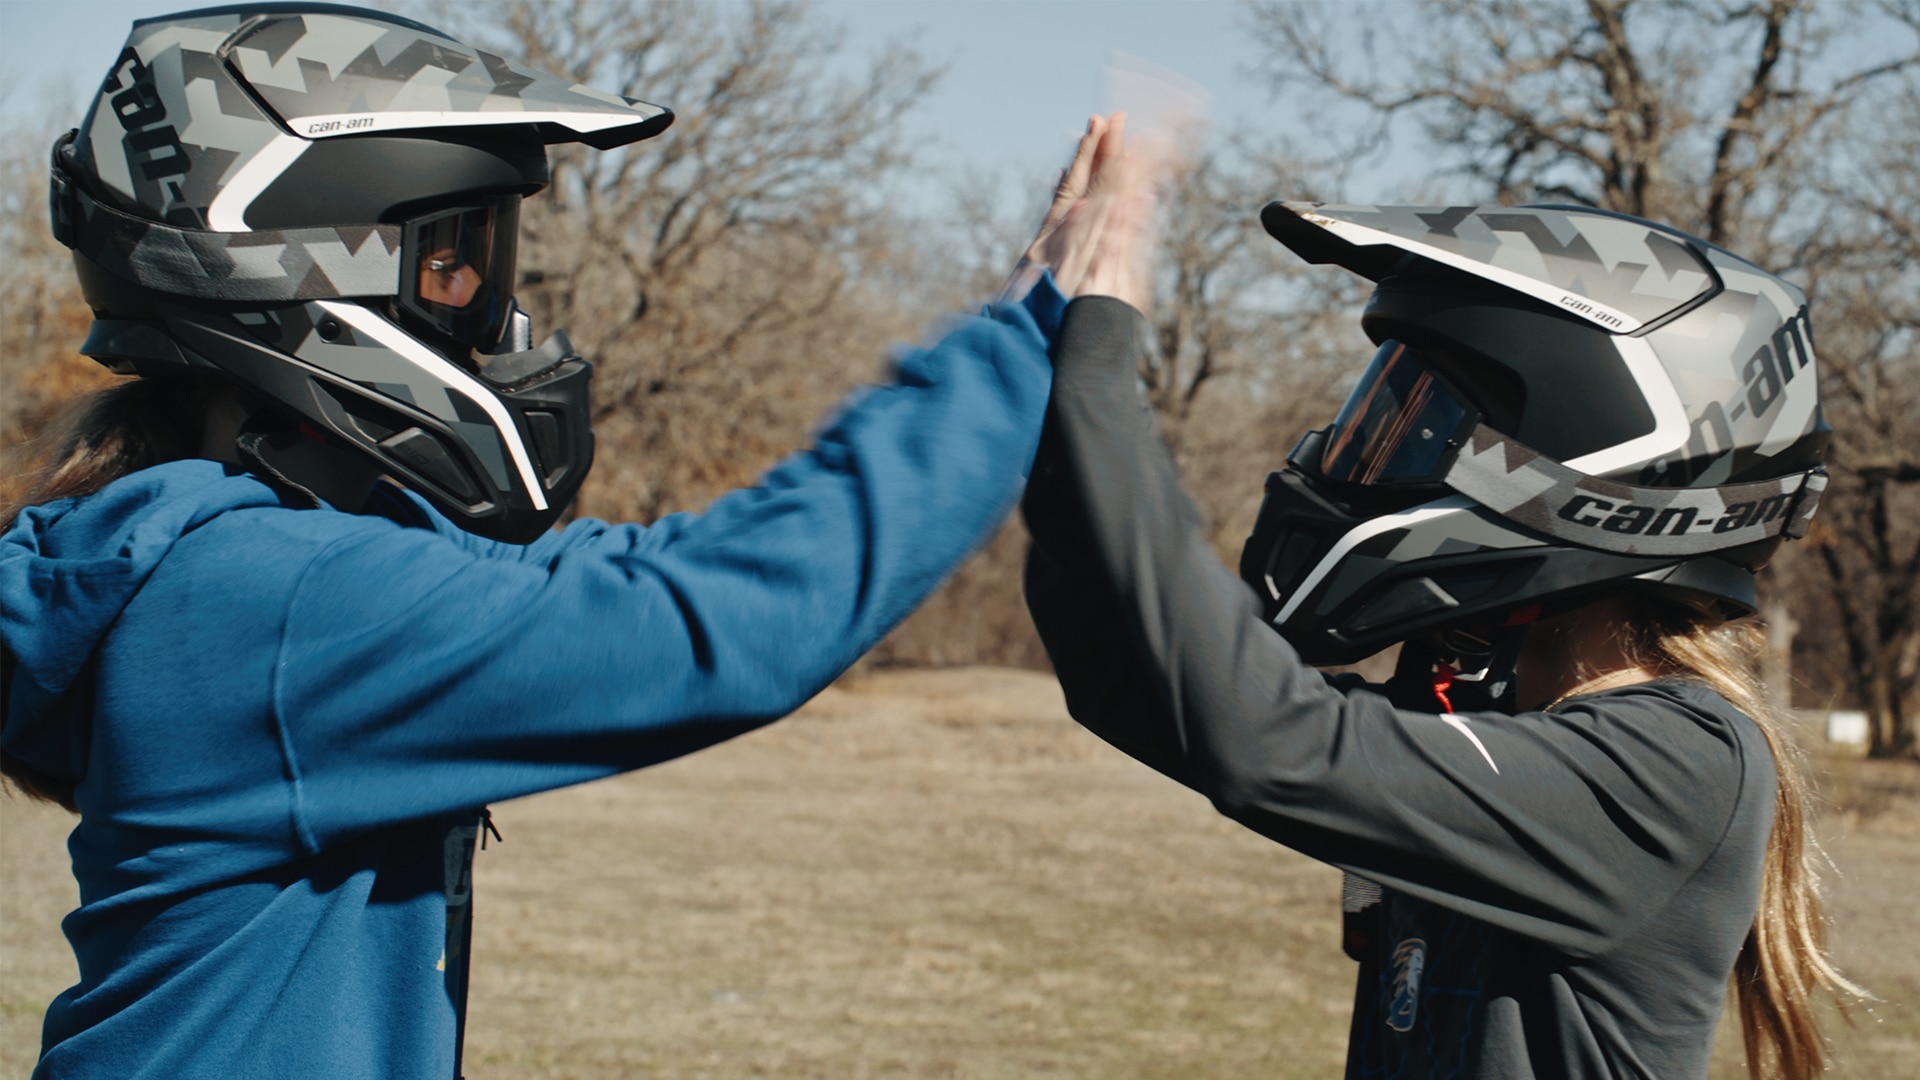 Riders wearing Off-Road Helmets giving each other a high five